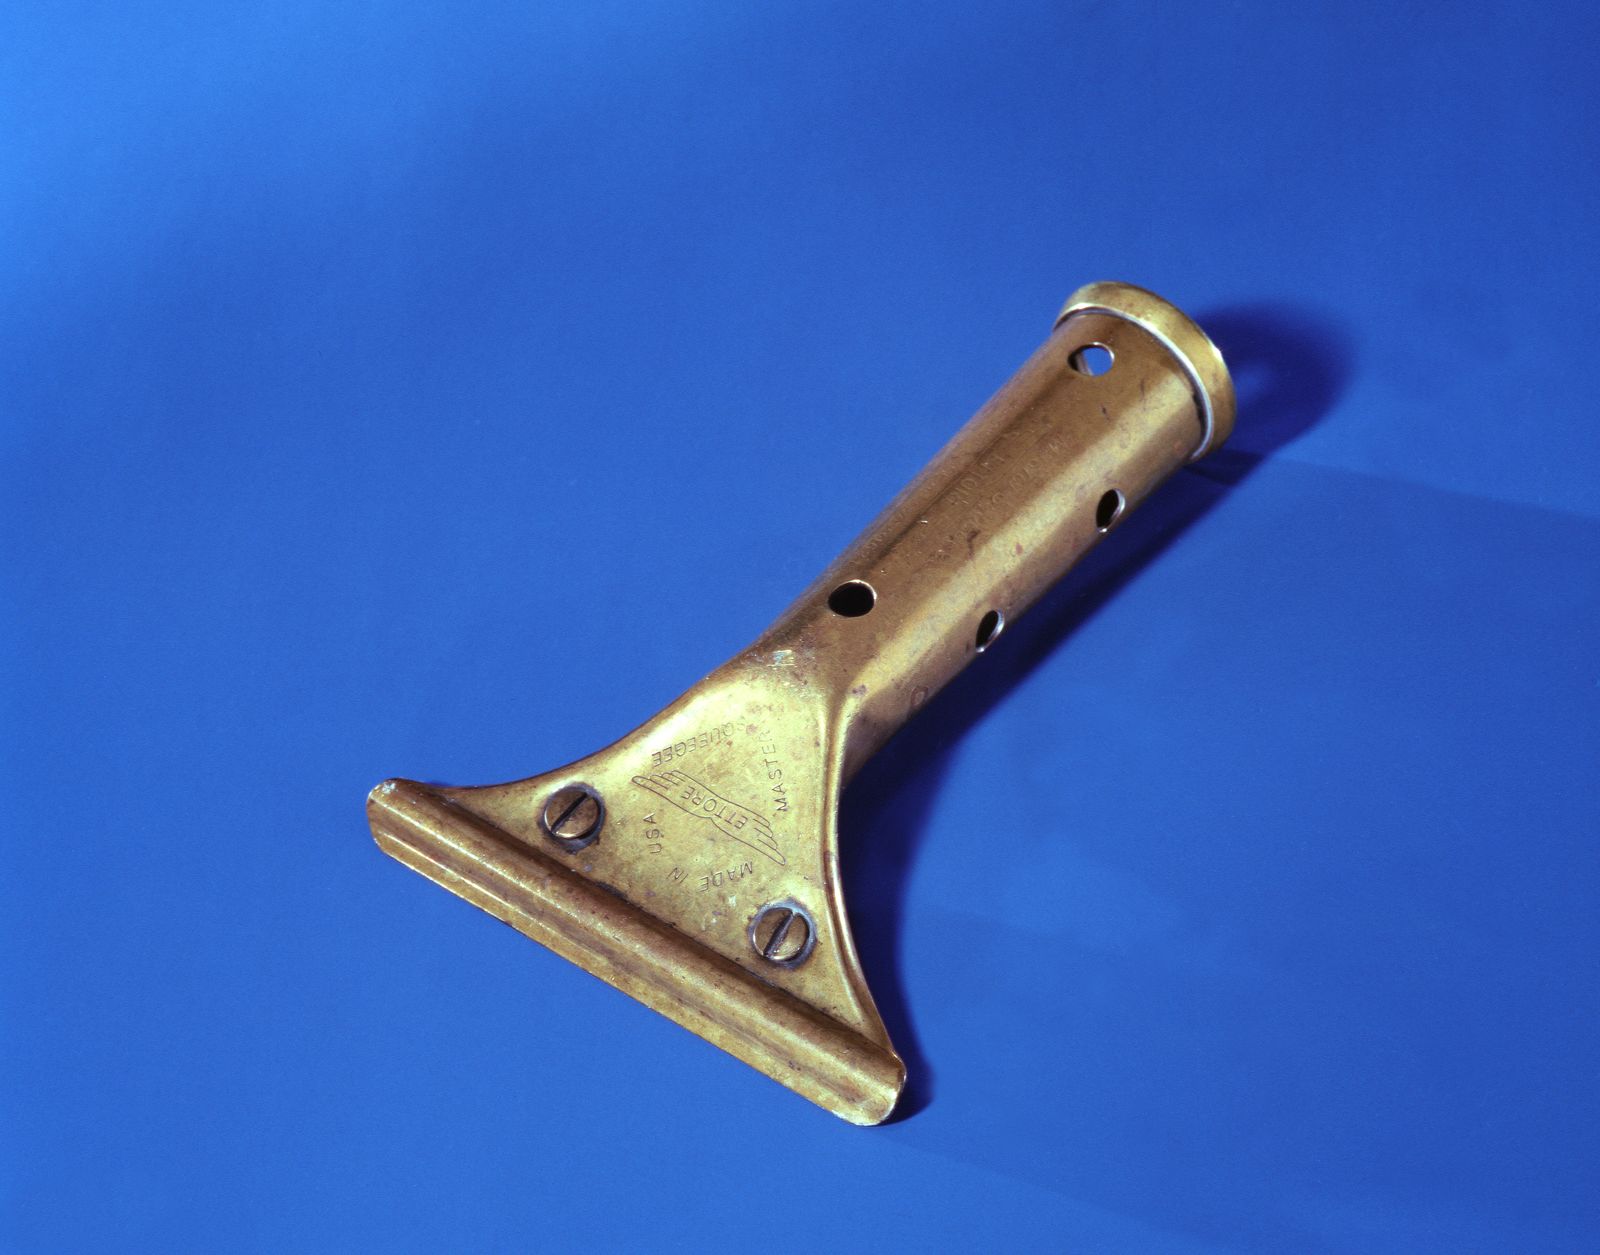 How a Squeegee Handle Became a Life-Saving Tool on September 11, 2001, At  the Smithsonian